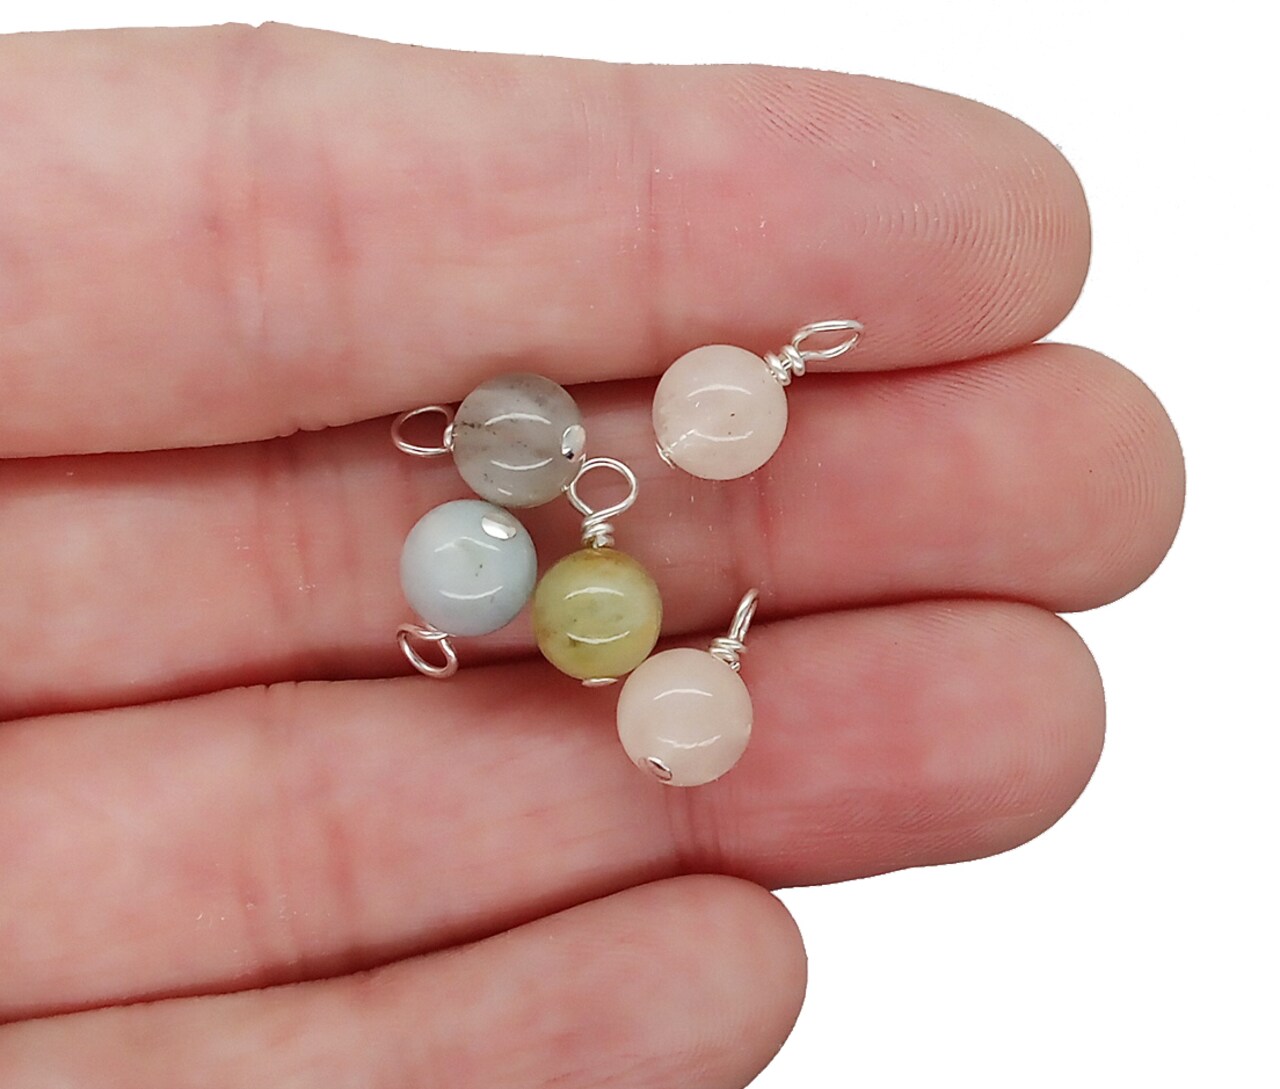 Beryl 6mm Bead Dangles, Small Gemstone Charms, 5 or 10 pieces, Adorabilities